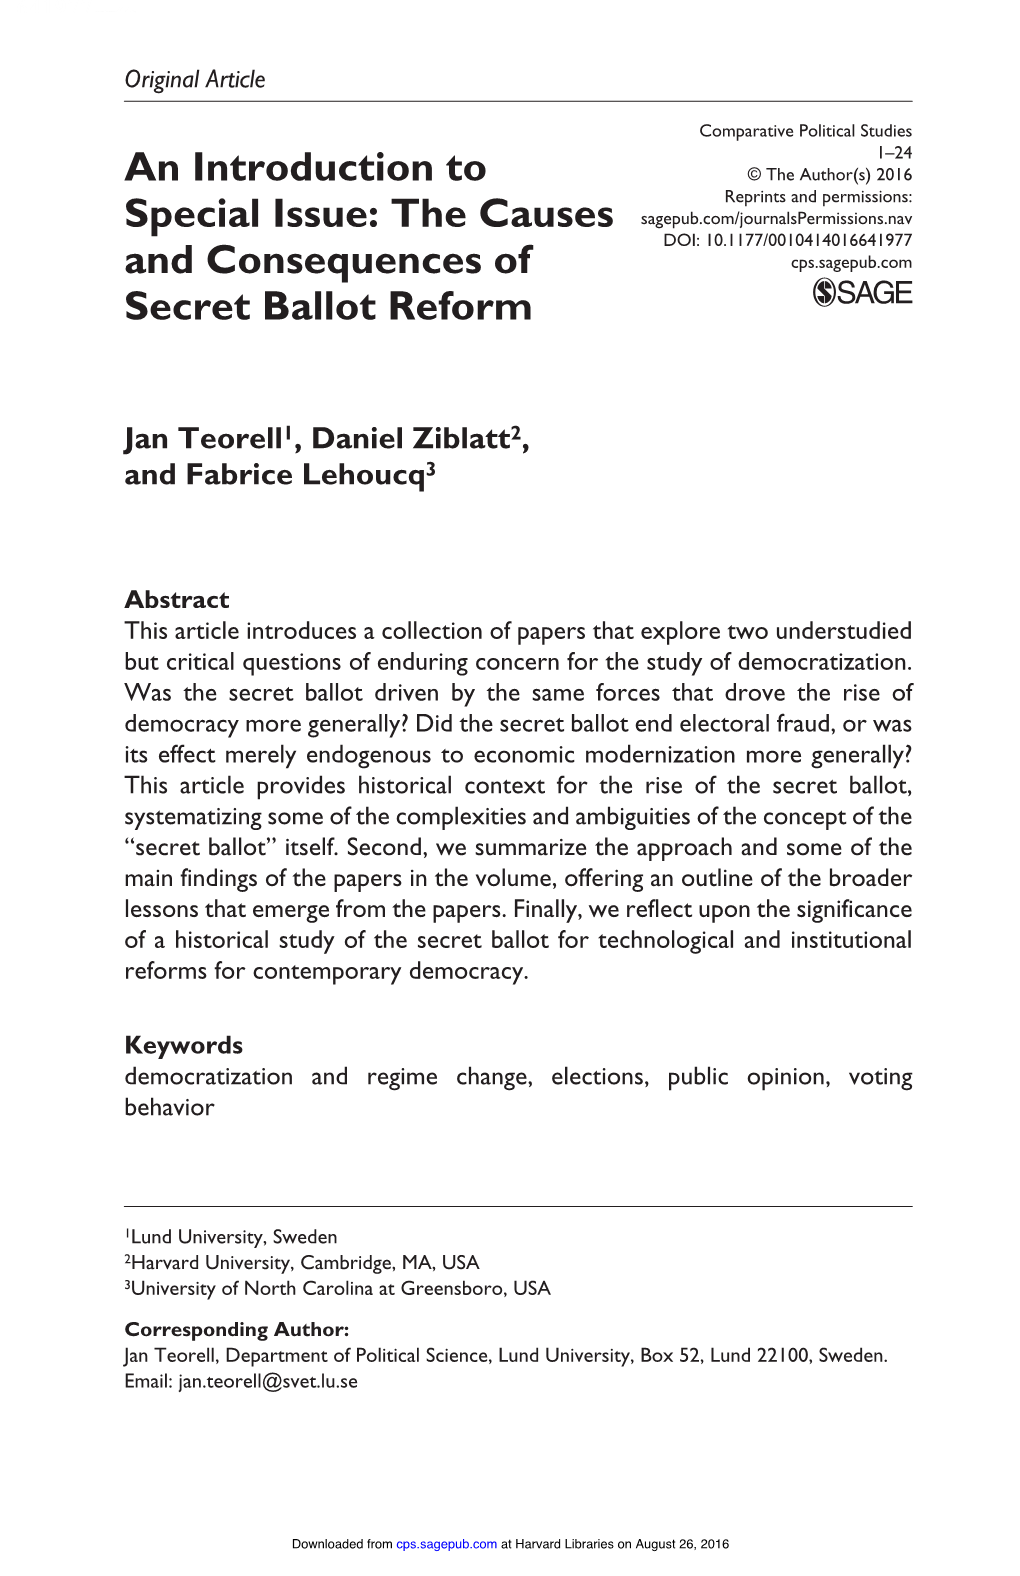 An Introduction to Special Issue: the Causes and Consequences of Secret Ballot Reform